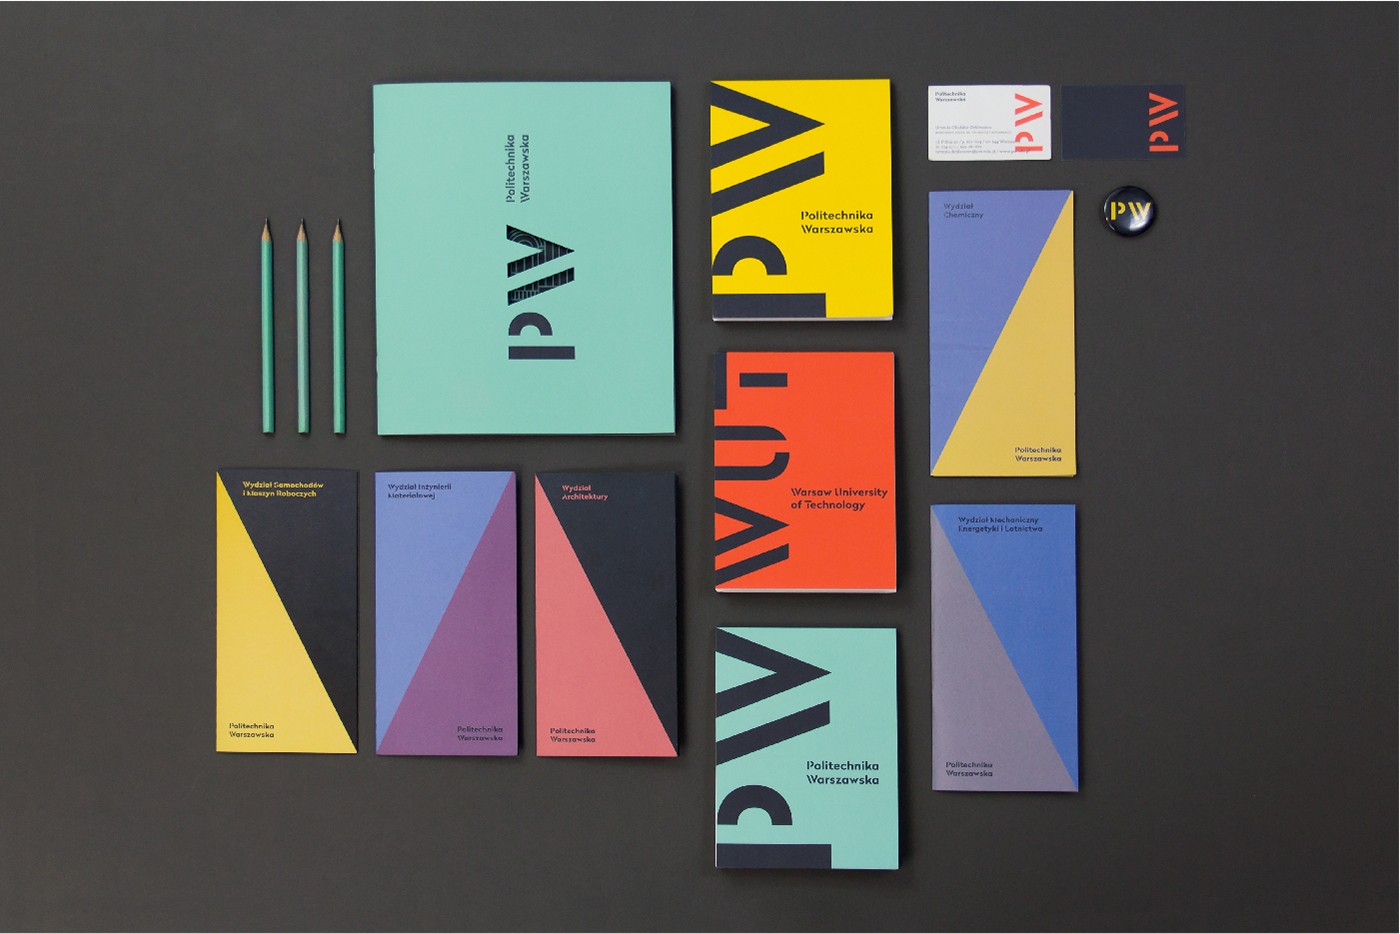 The Visual Identity of the Warsaw University of Technology